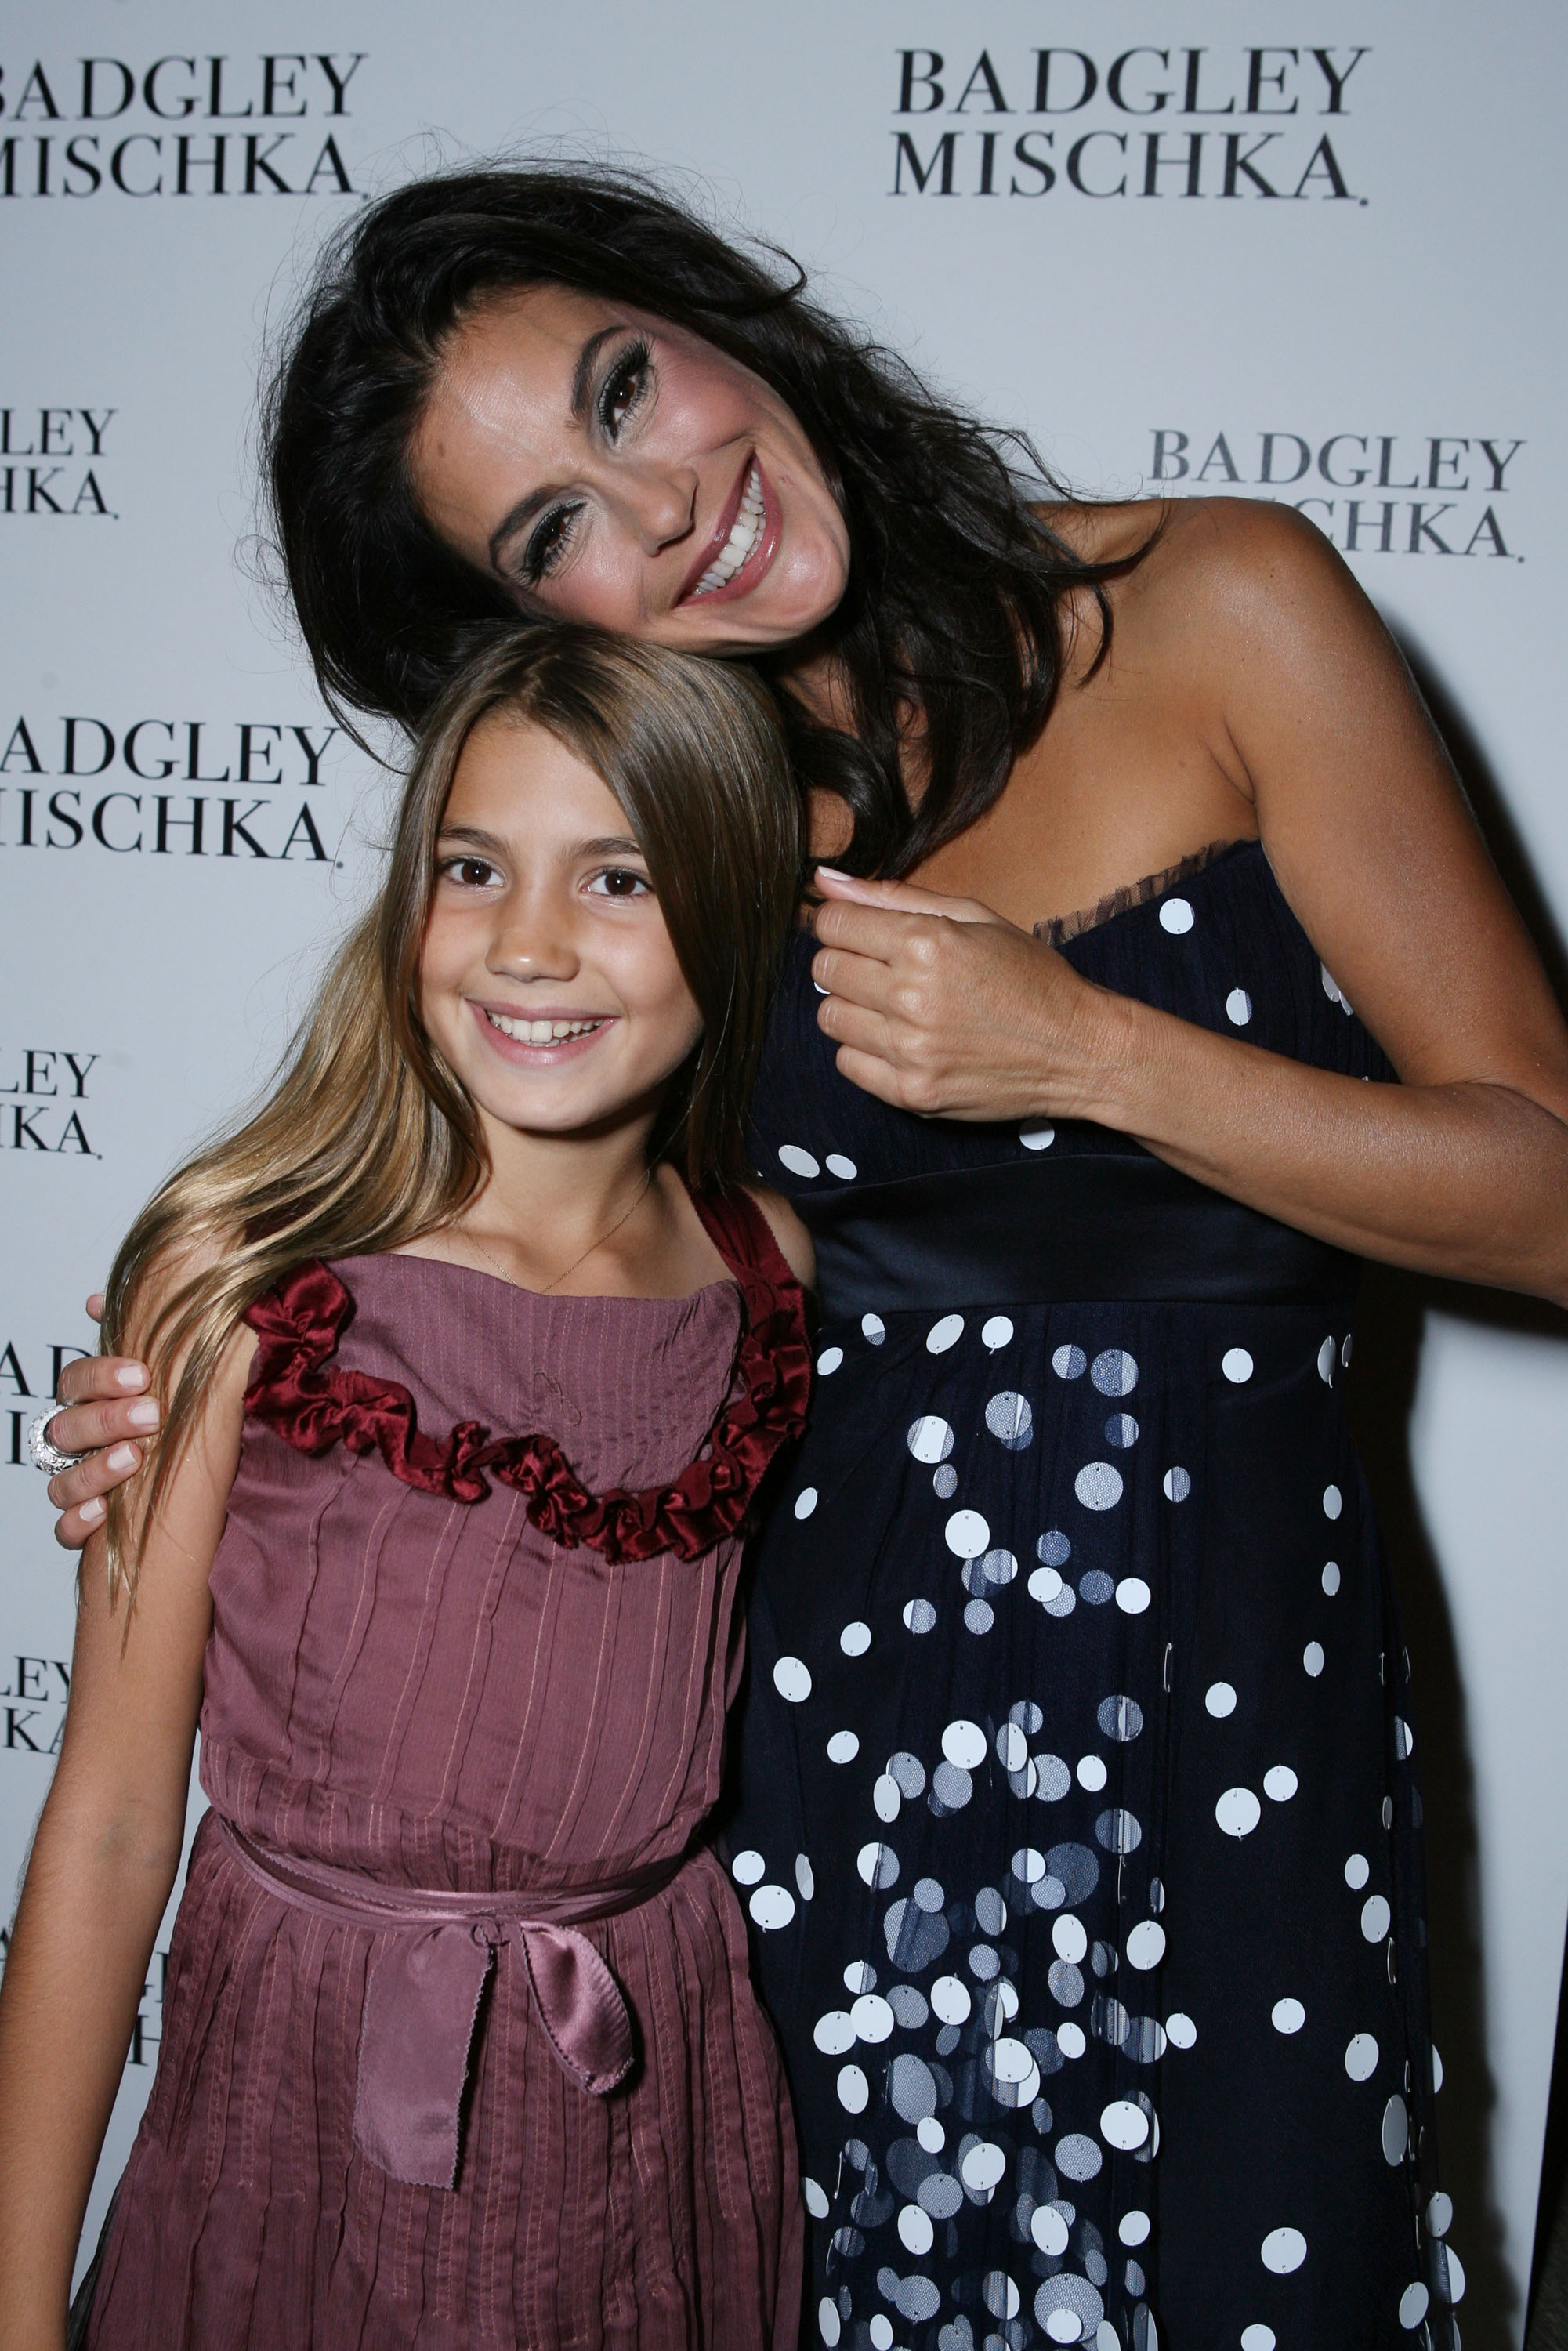 Emerson Tenney and Teri Hatcher in Los Angeles, California on August 27, 2007 | Source: Getty Images